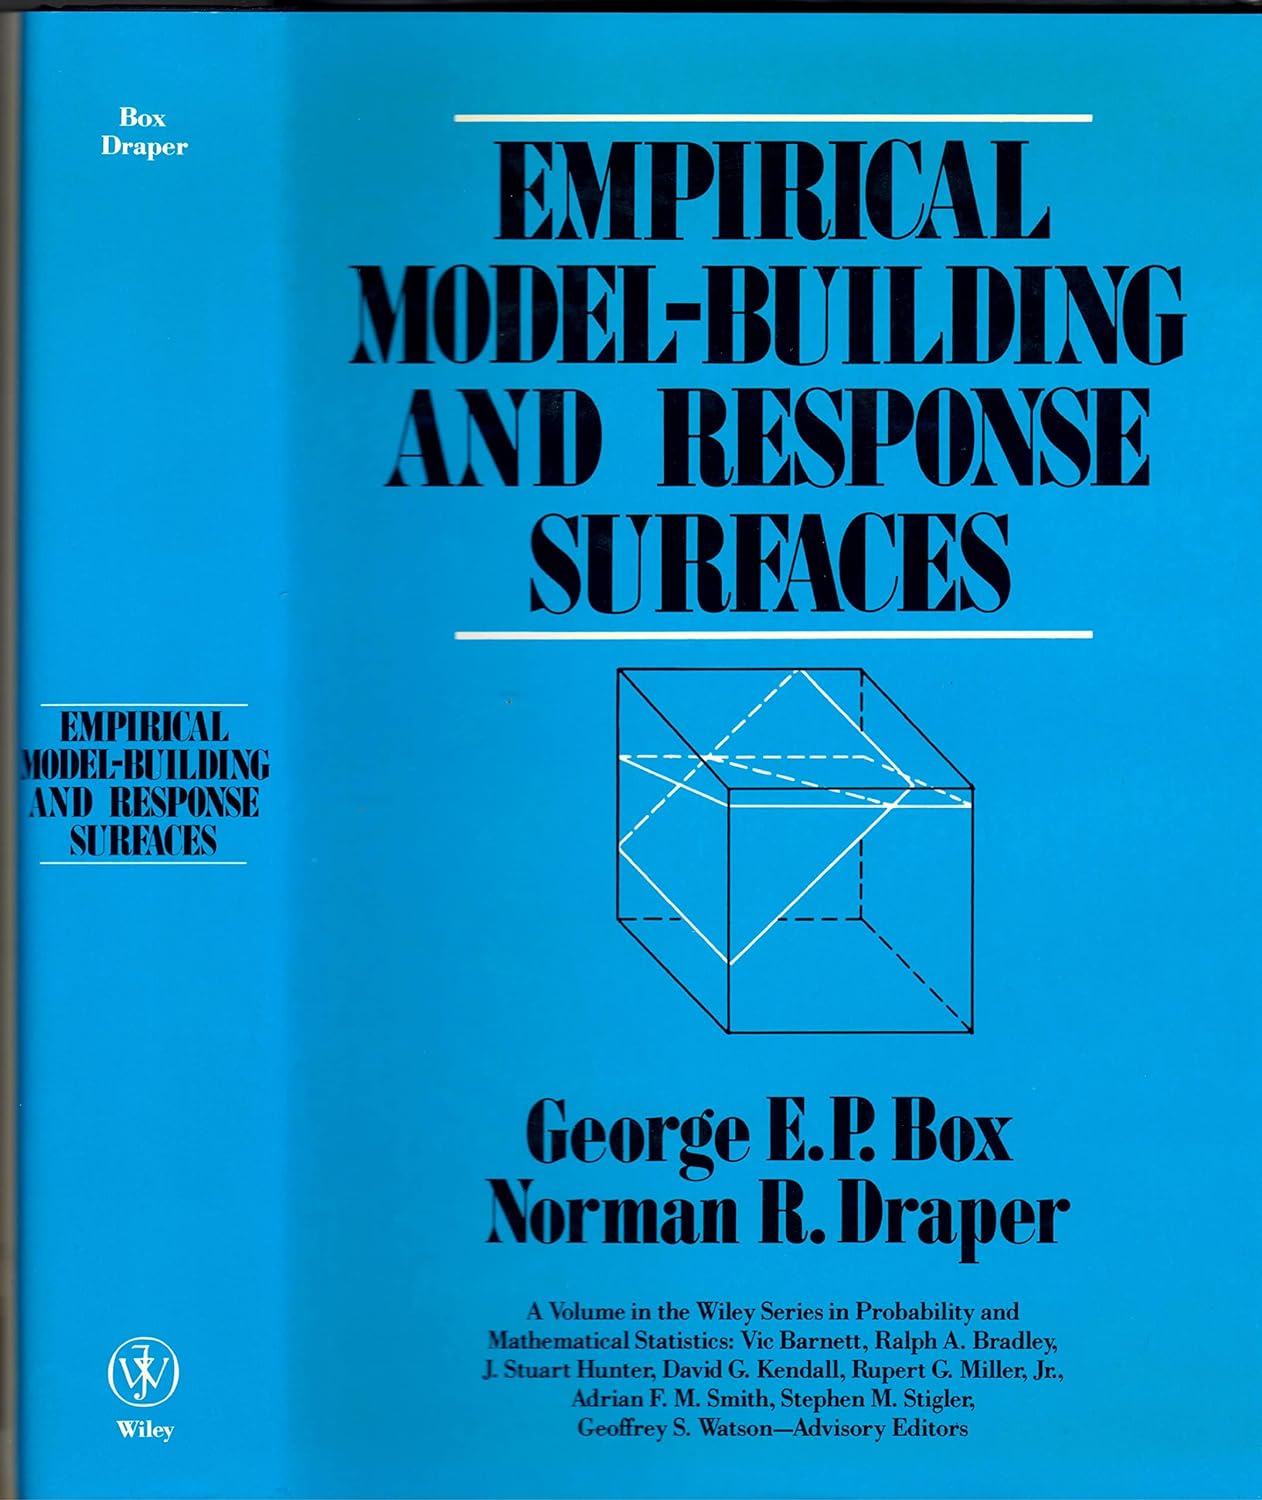 Empirical modelo-building and response surfaces / George EP Box, Norman R. Draper